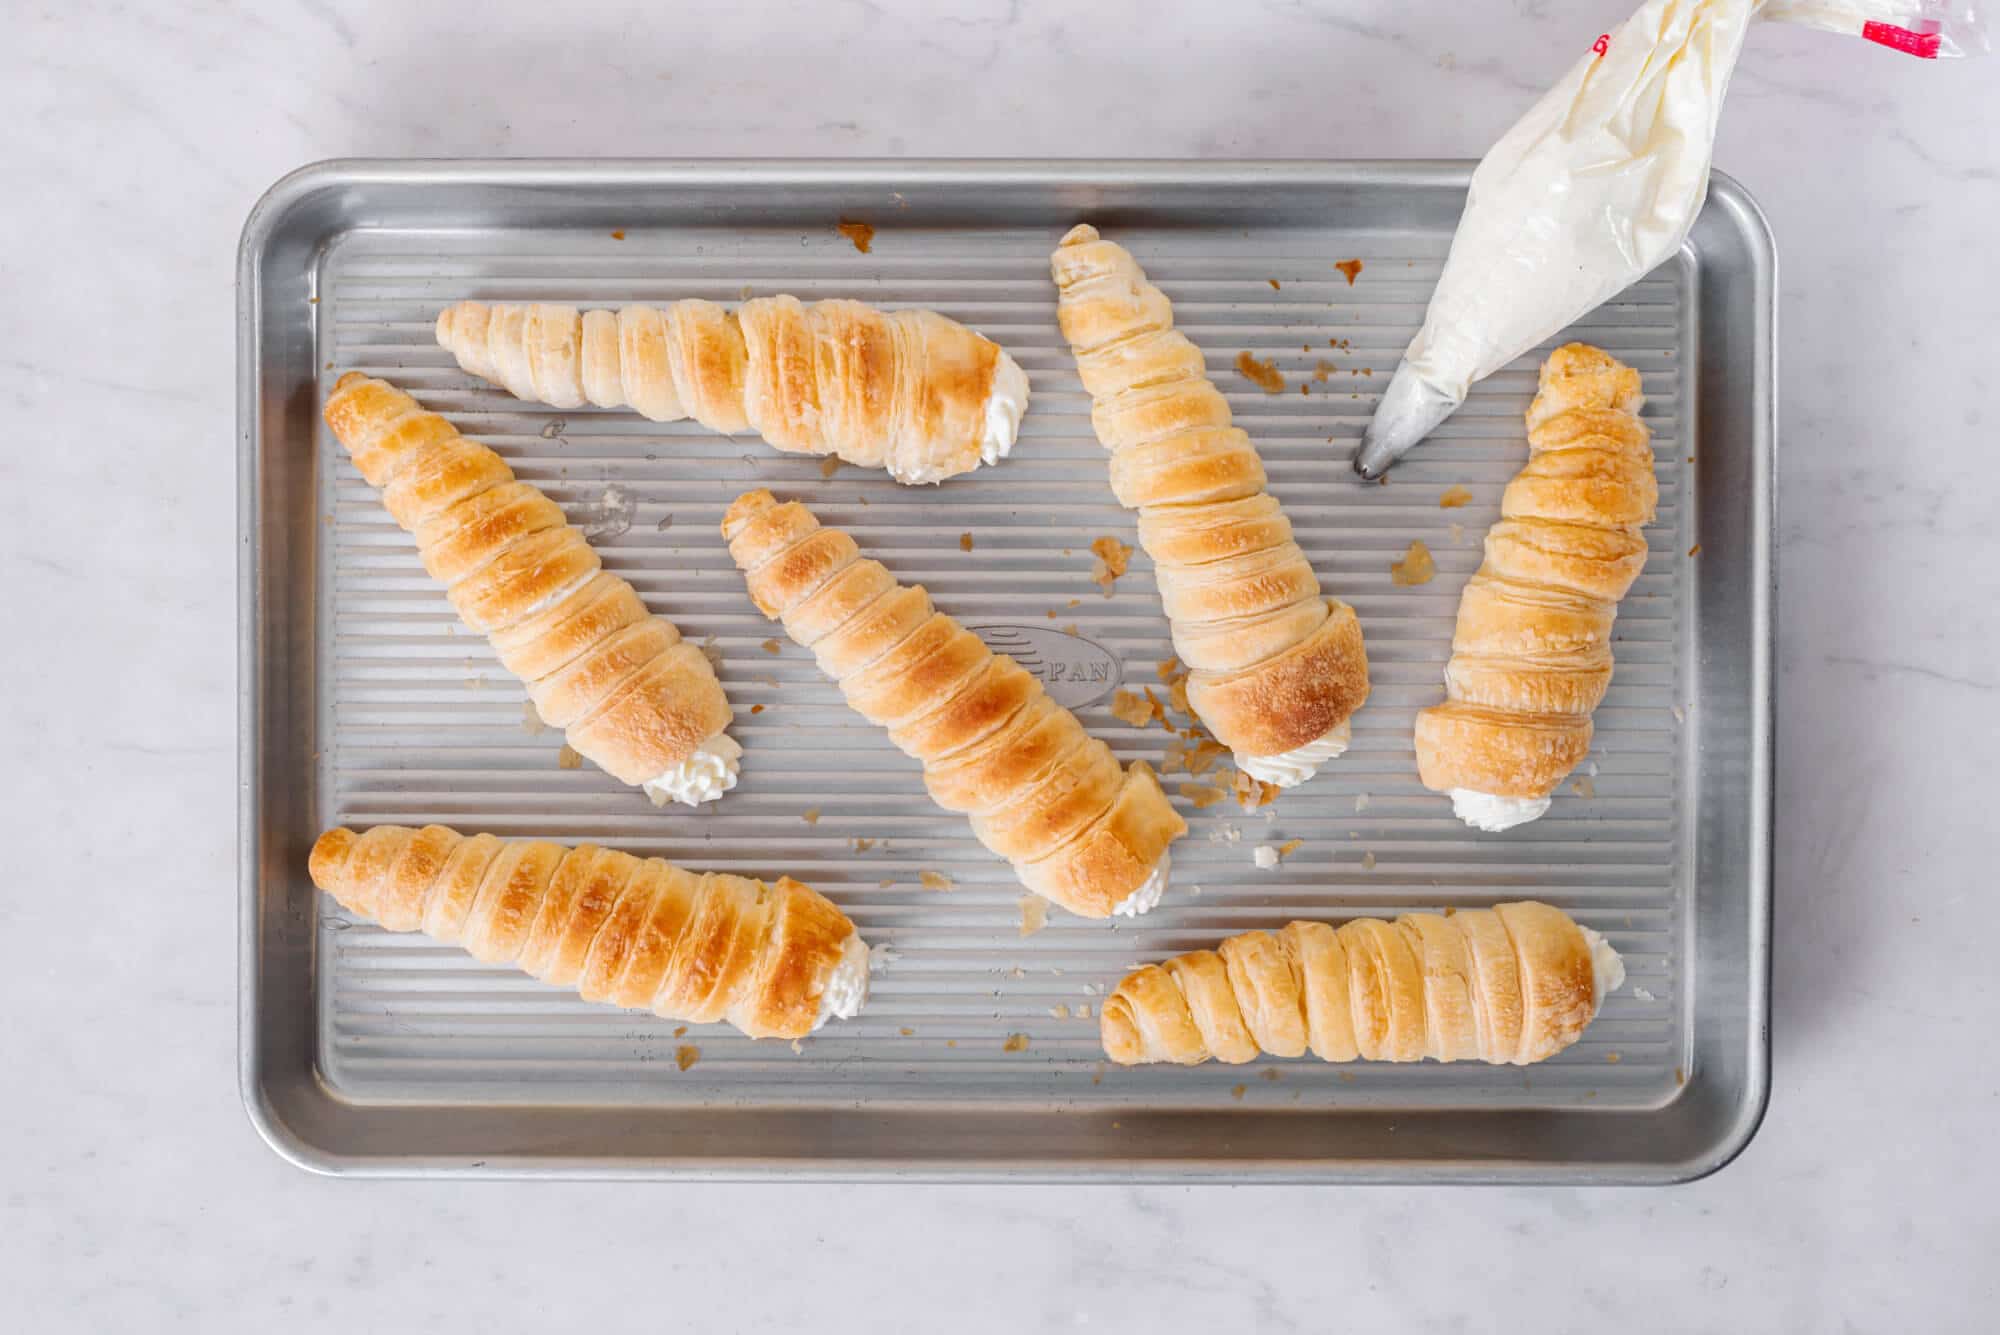 Cream horns on a baking tray freshly filled.